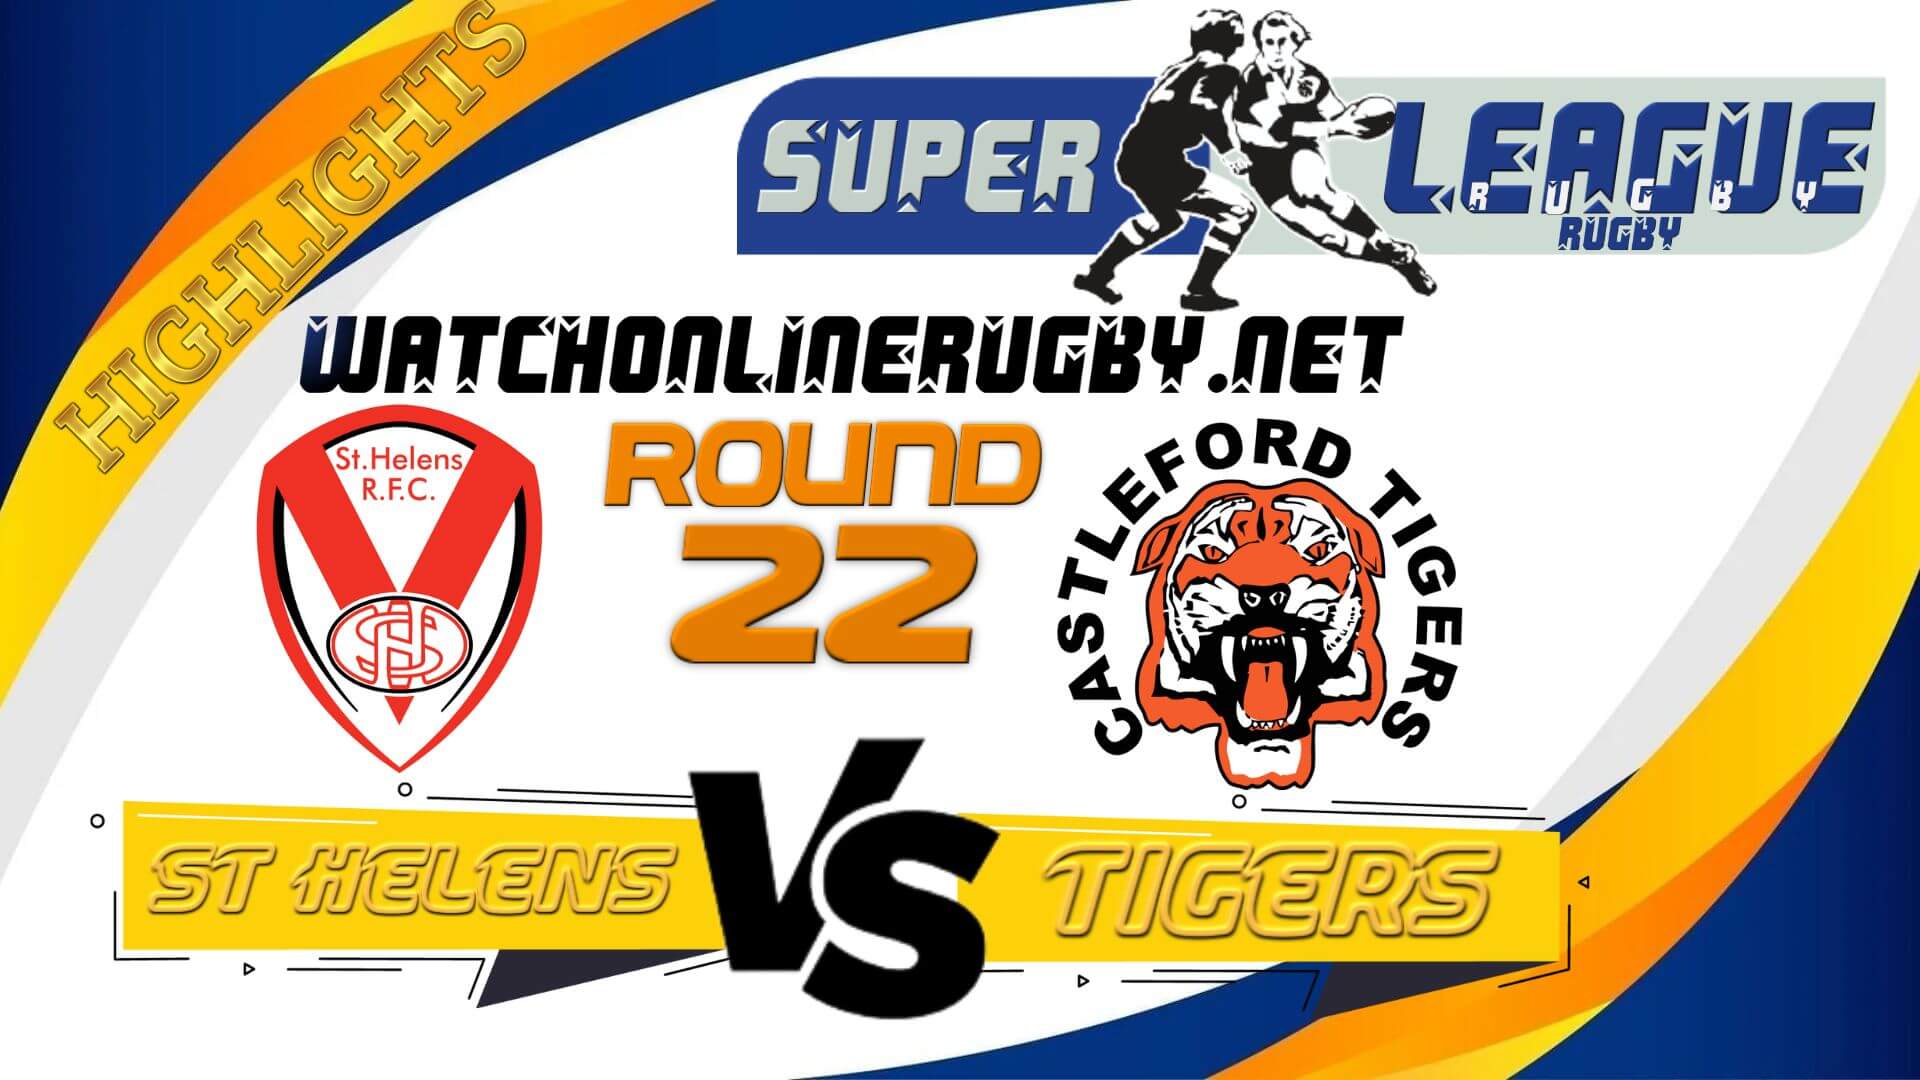 St Helens Vs Castleford Tigers Super League Rugby 2022 RD 22